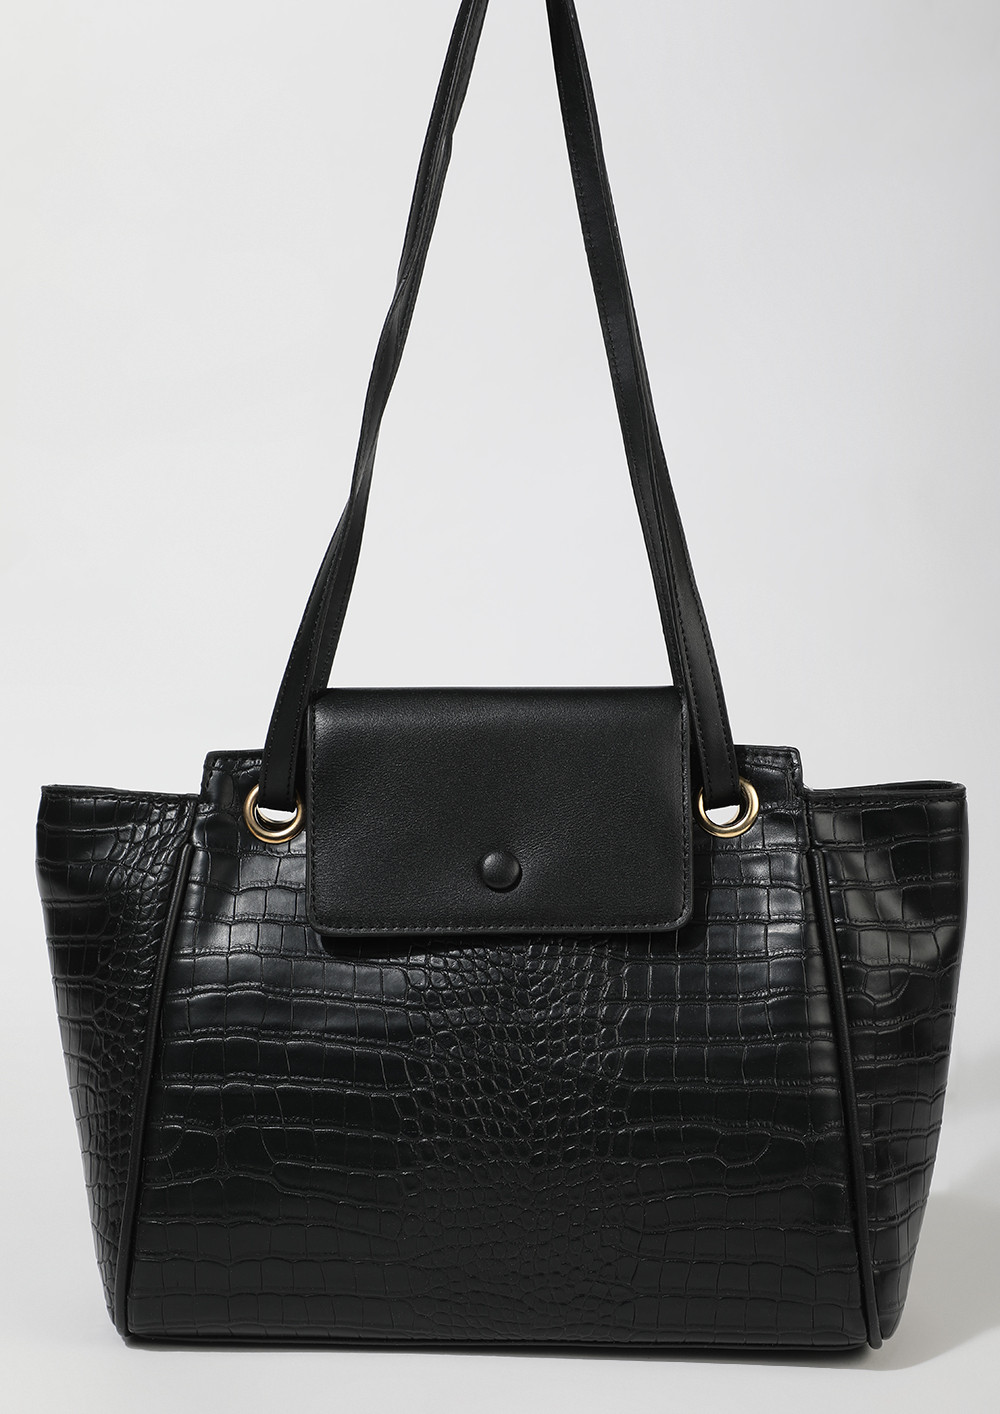 WHIMS AND FANCIES IN BLACK TOTE BAG